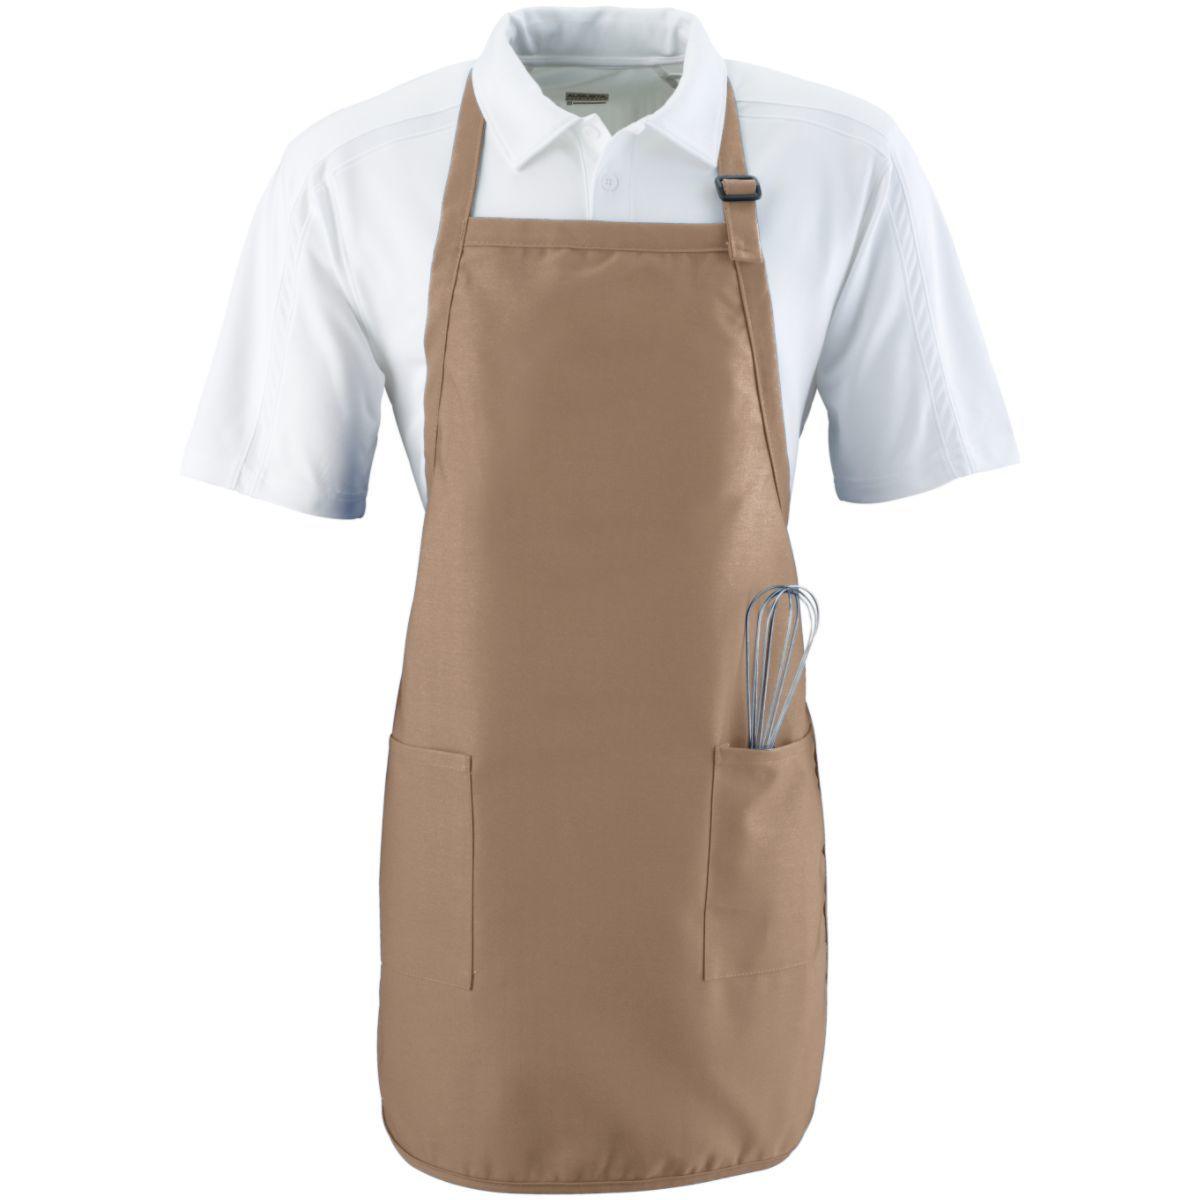 Full Length Apron With Pockets - Dresses Max